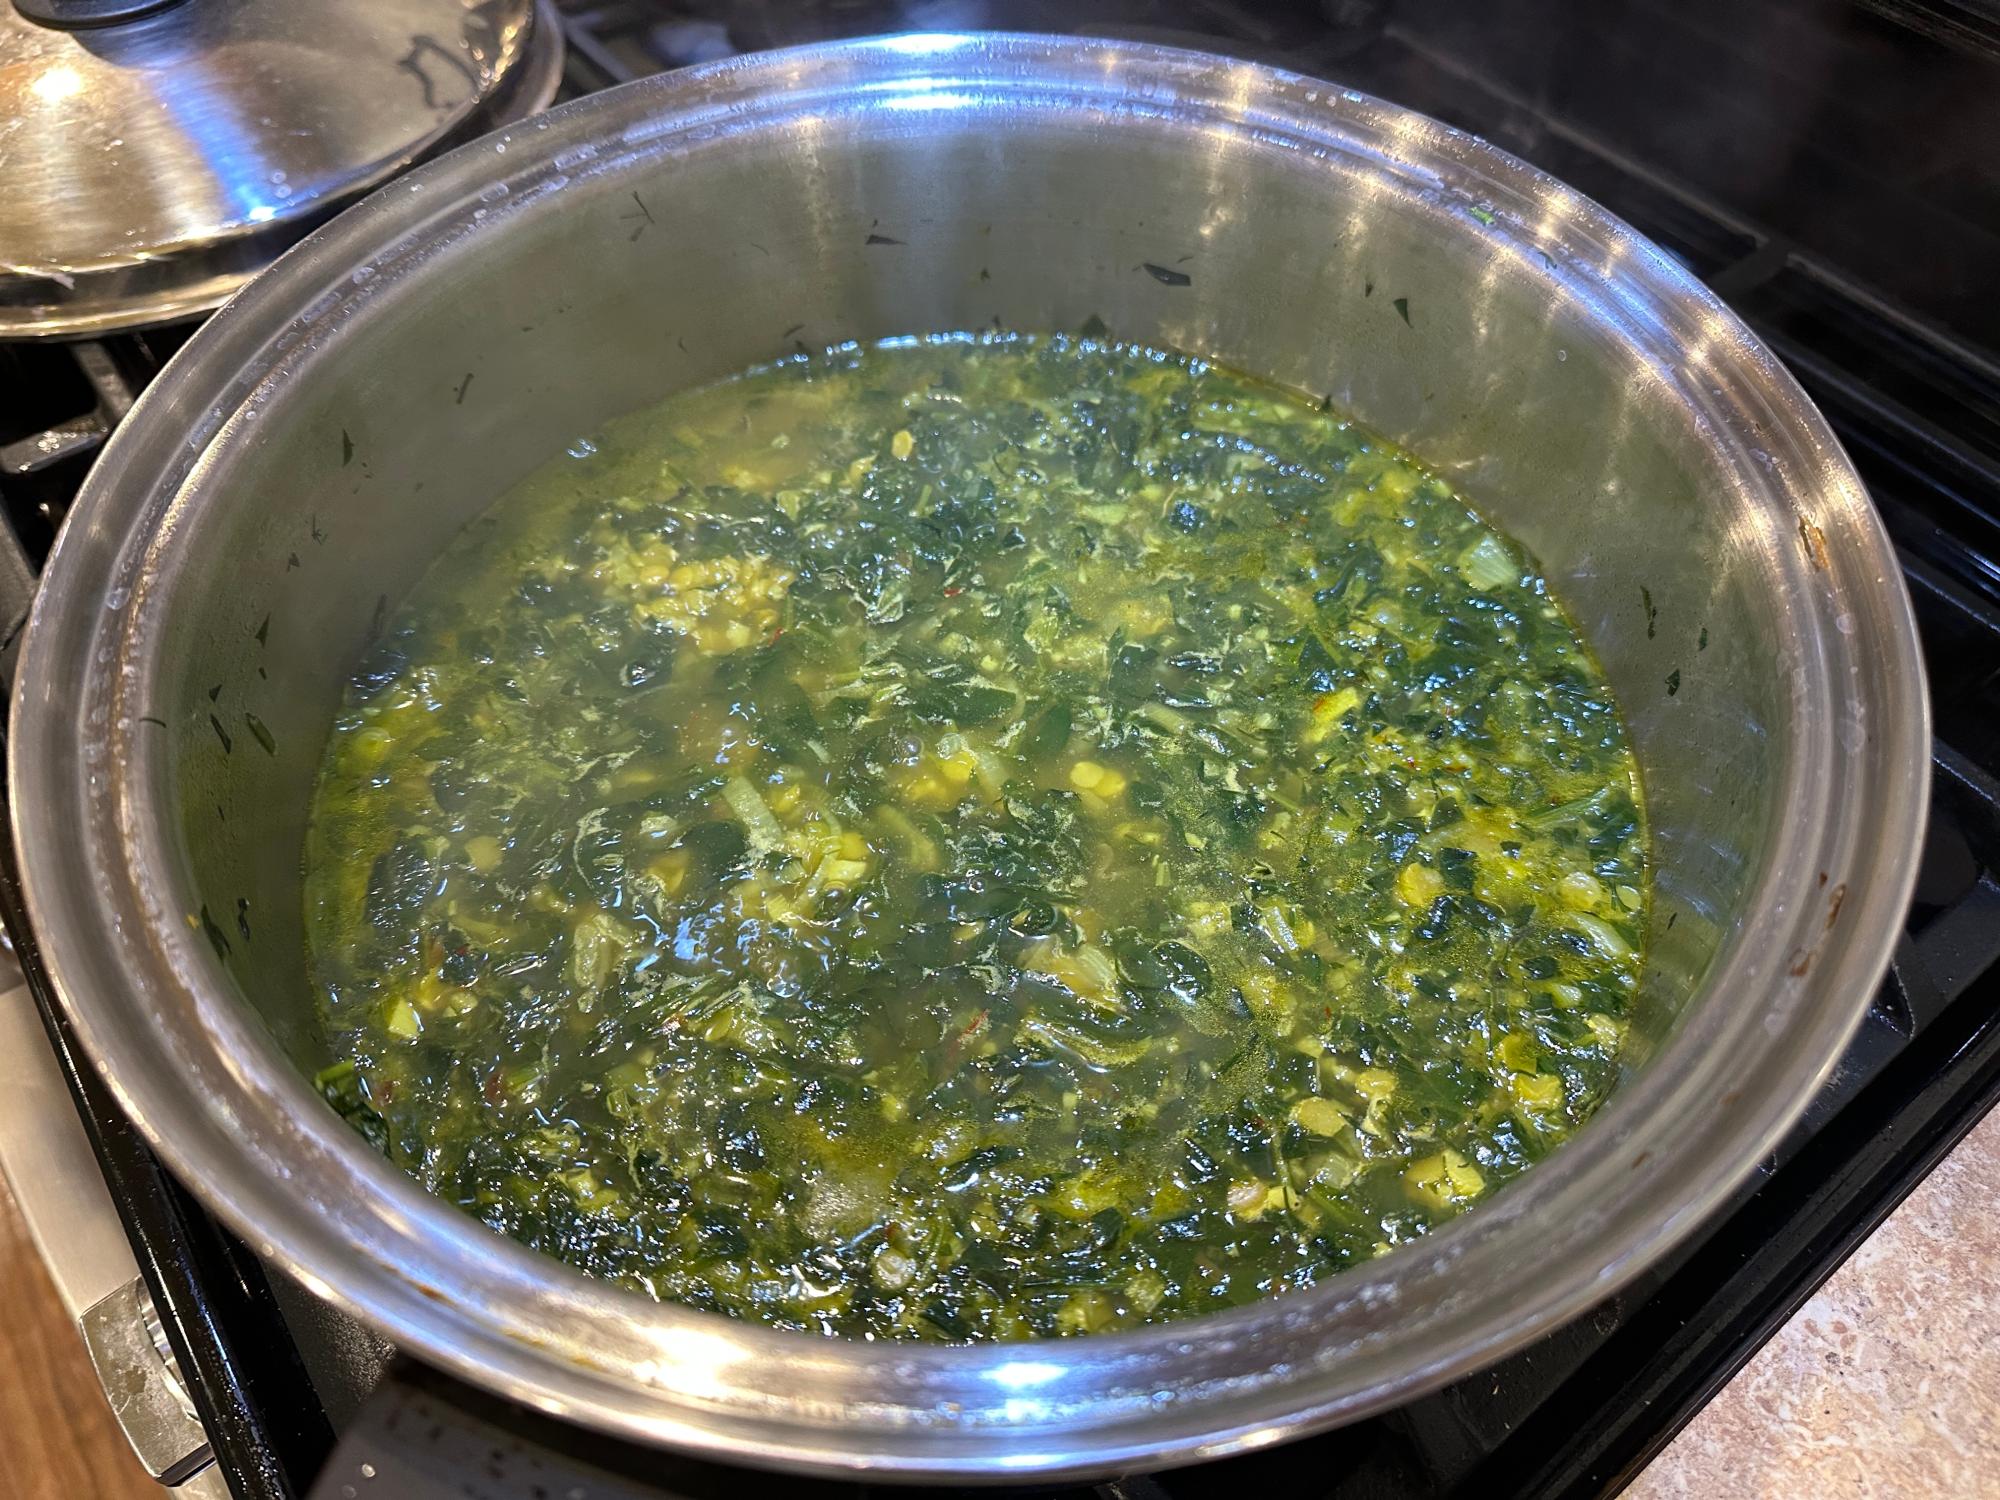 Greens cooking in the pot.